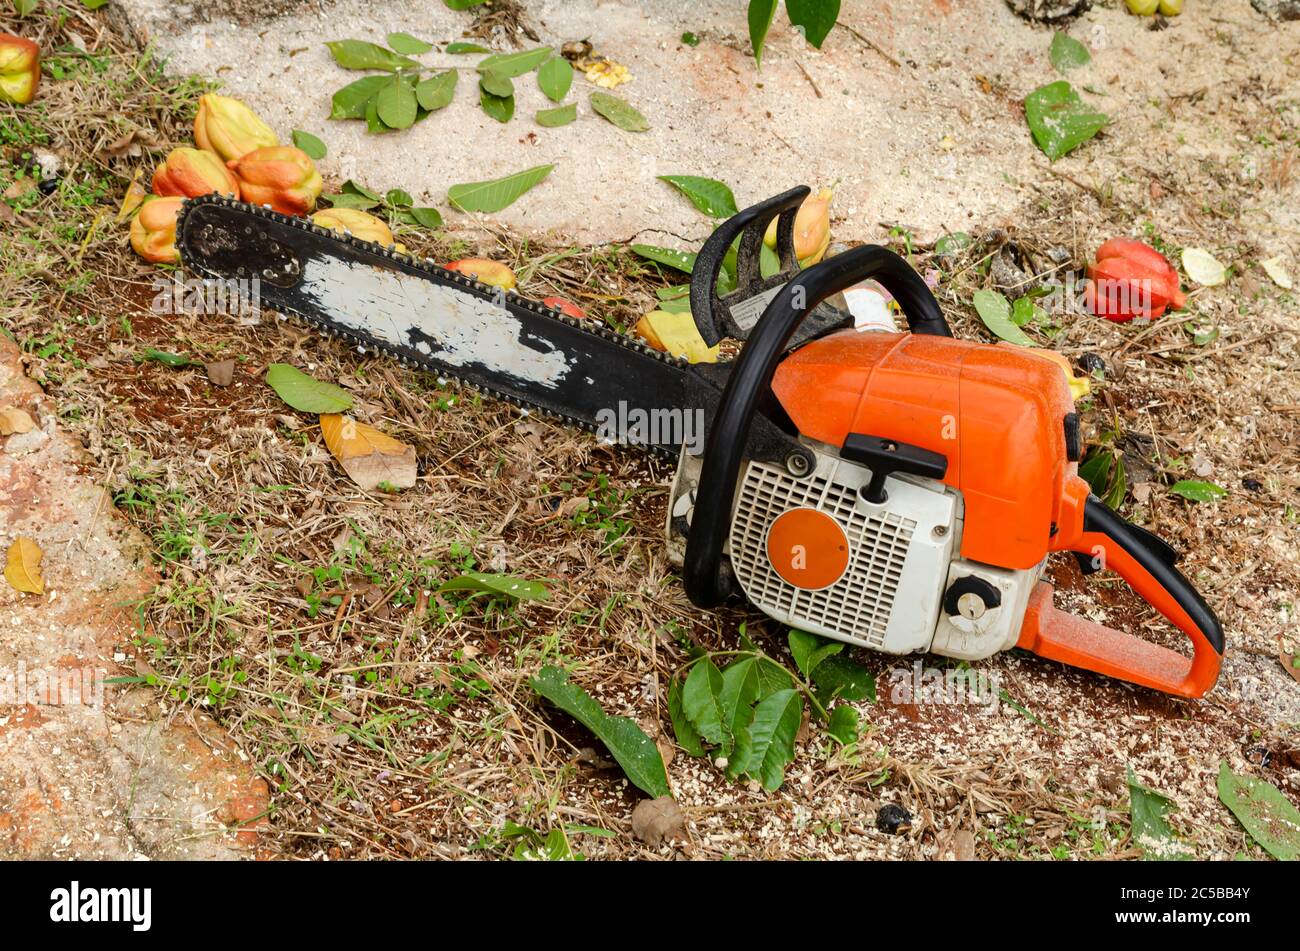 Chainsaw On Ground Stock Photo